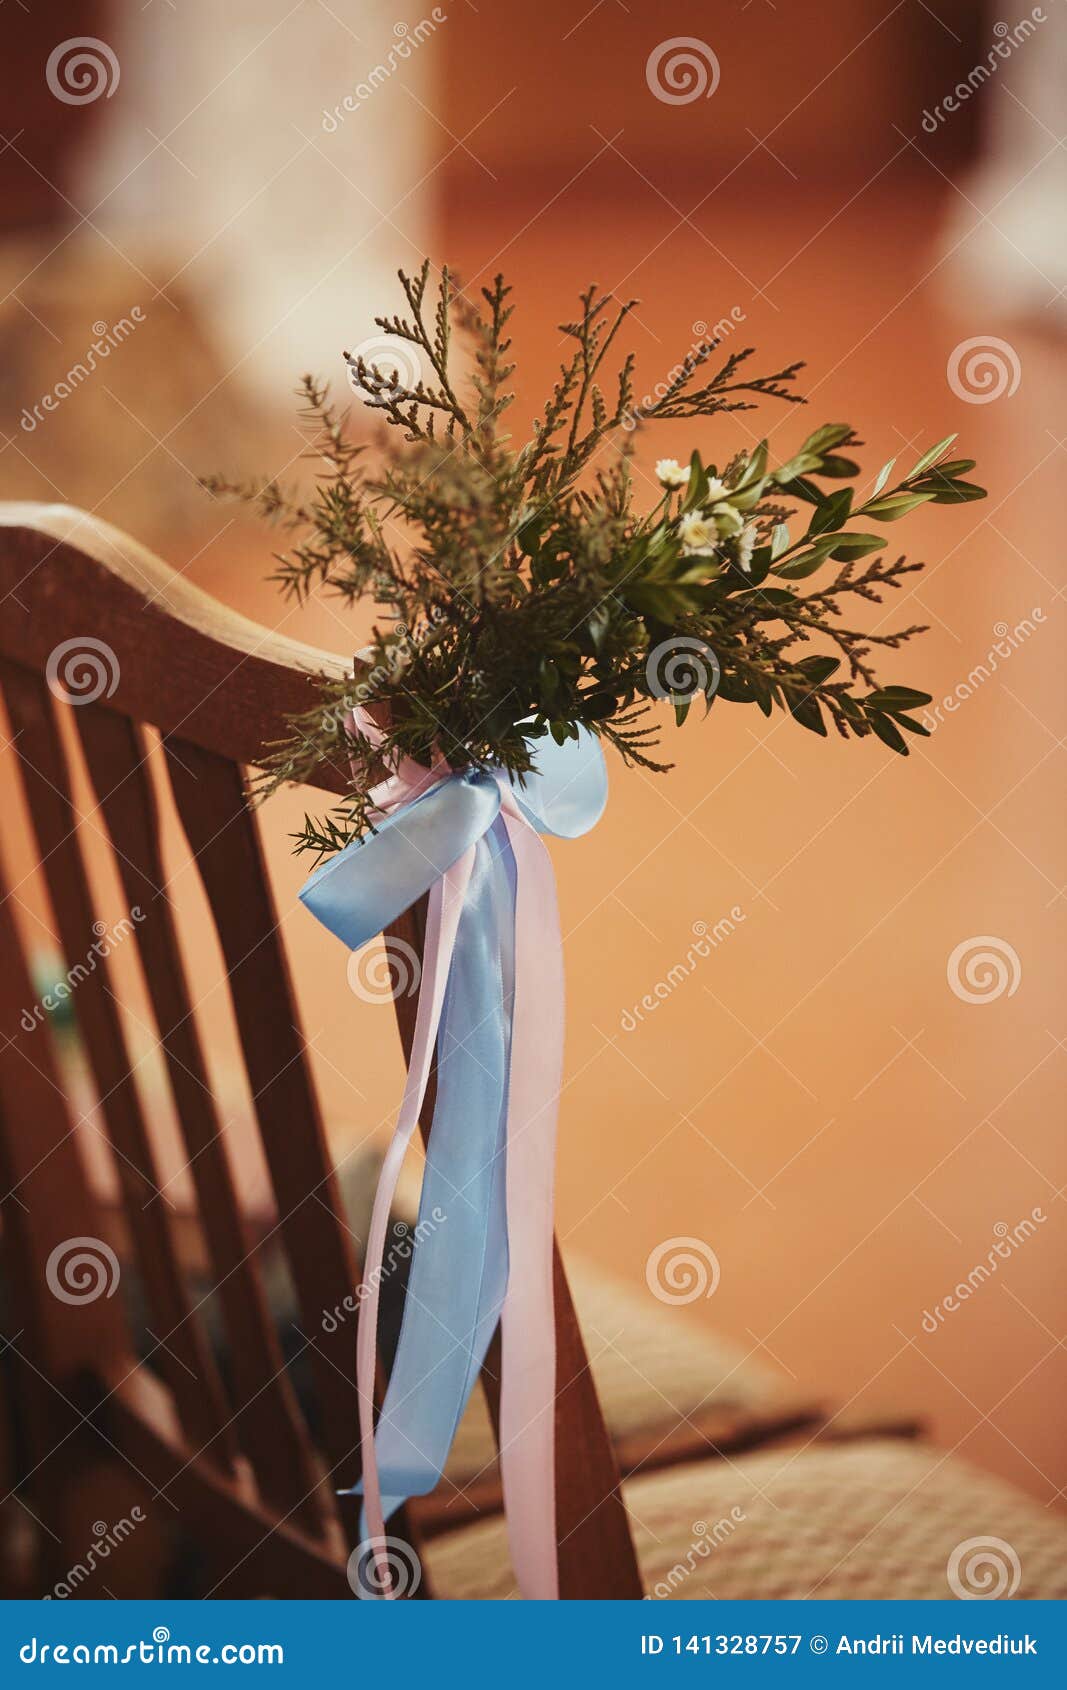 Wedding Decor For Chairs With Flowers In Church Stock Image